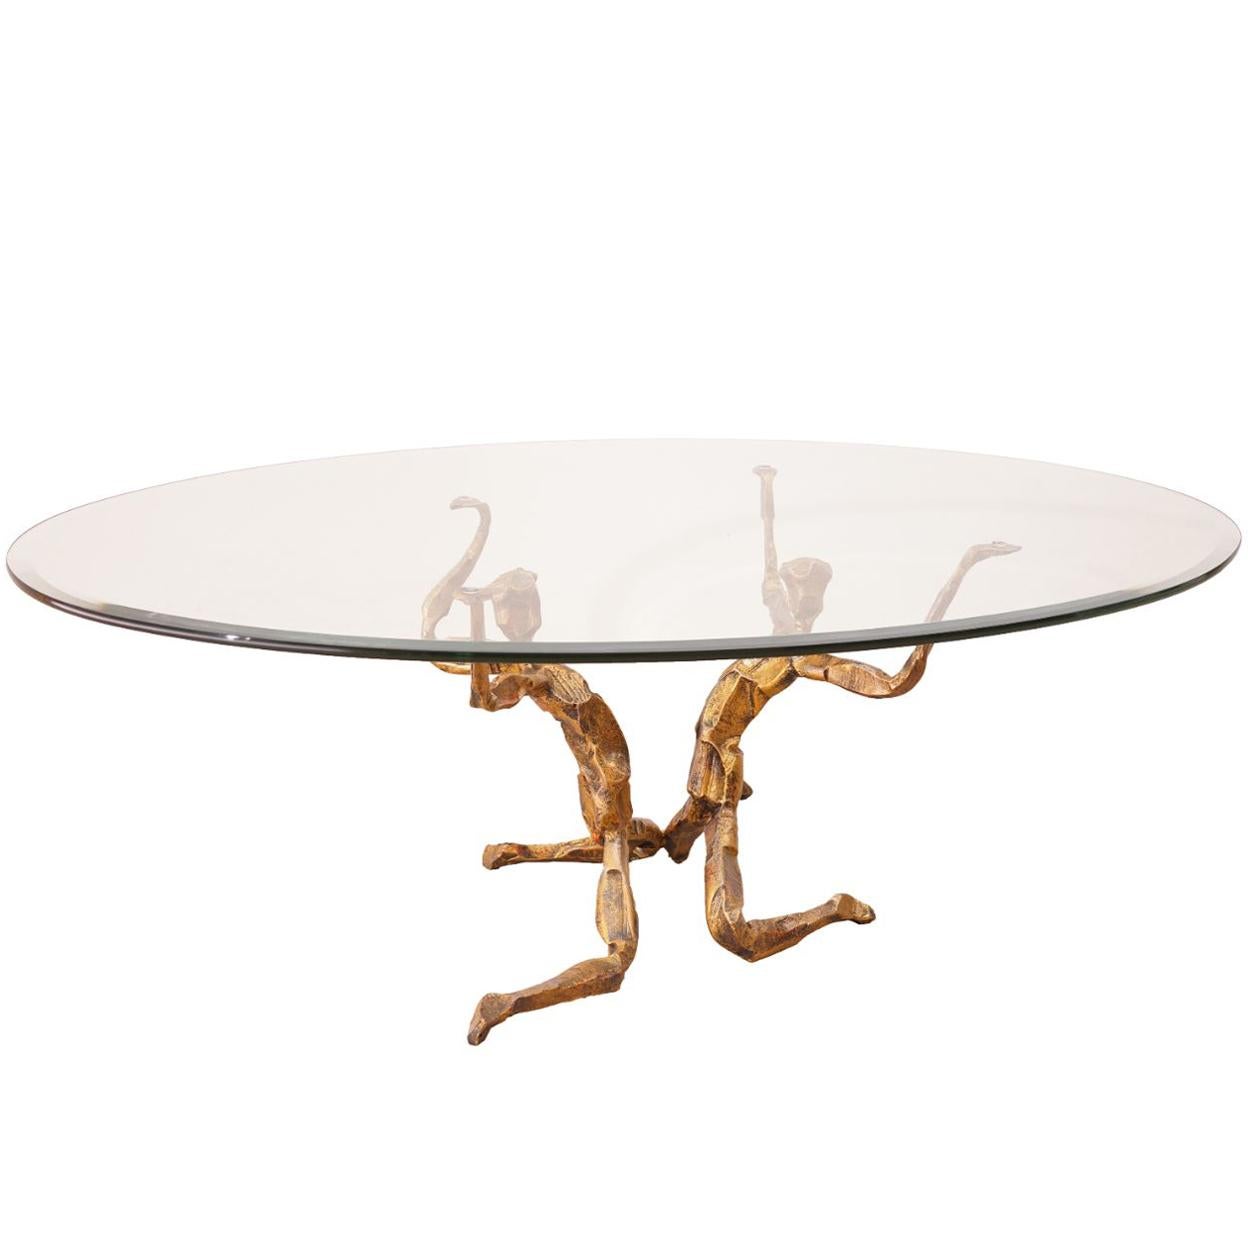 This Brutalist style coffee table was made by Italian artist Salvino Marsura. The table has a gilded wrought iron frame and an oval glass top with a beveled edge. I statement piece! The Marsura signature is printed inside the gilded iron